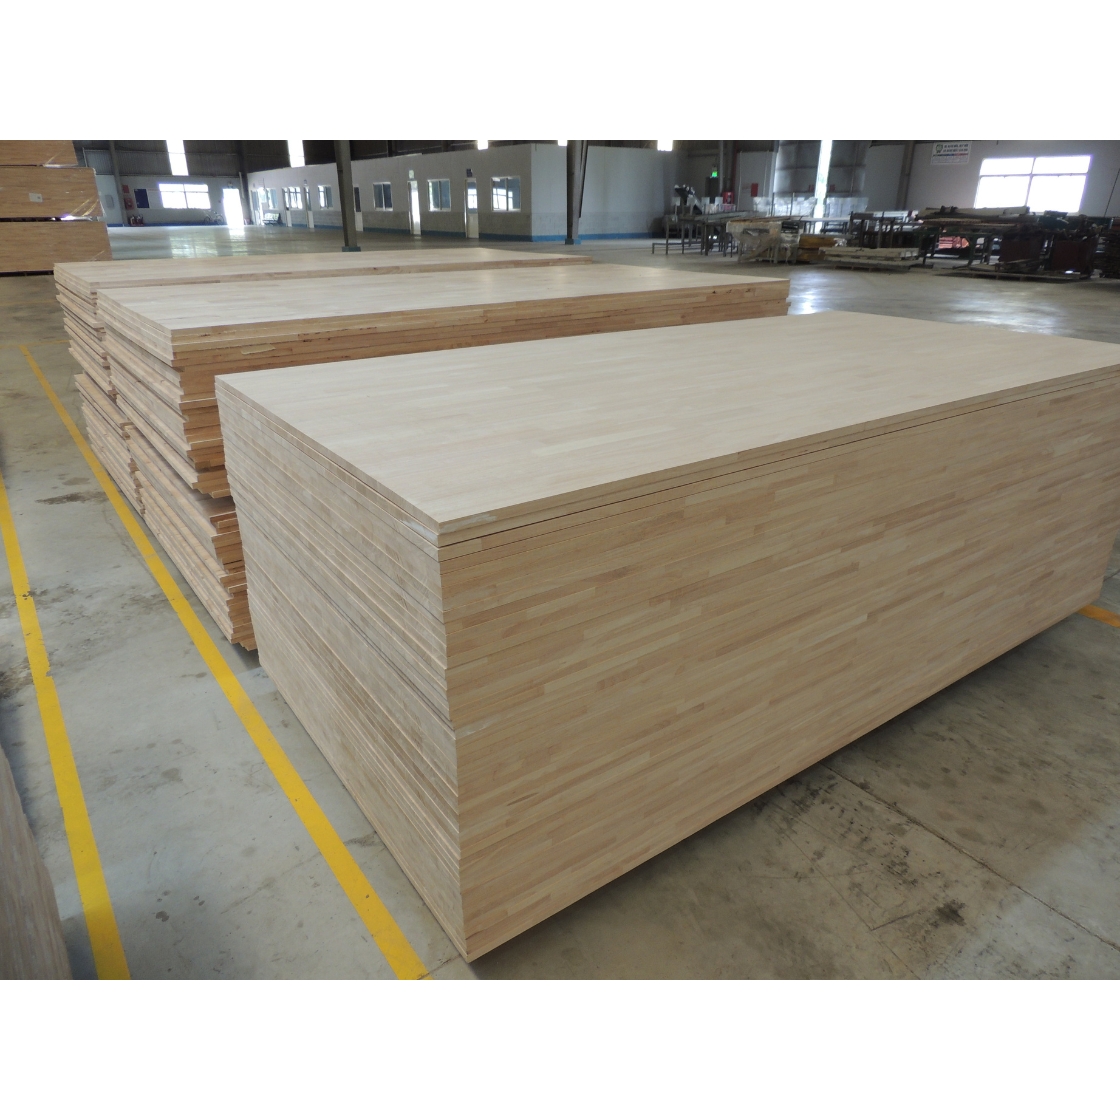 Rubber Wood Professional Team Rubber Wood Indoor Furniture Fsc-Coc Customized Packaging Made In Vietnam Manufacturer 3